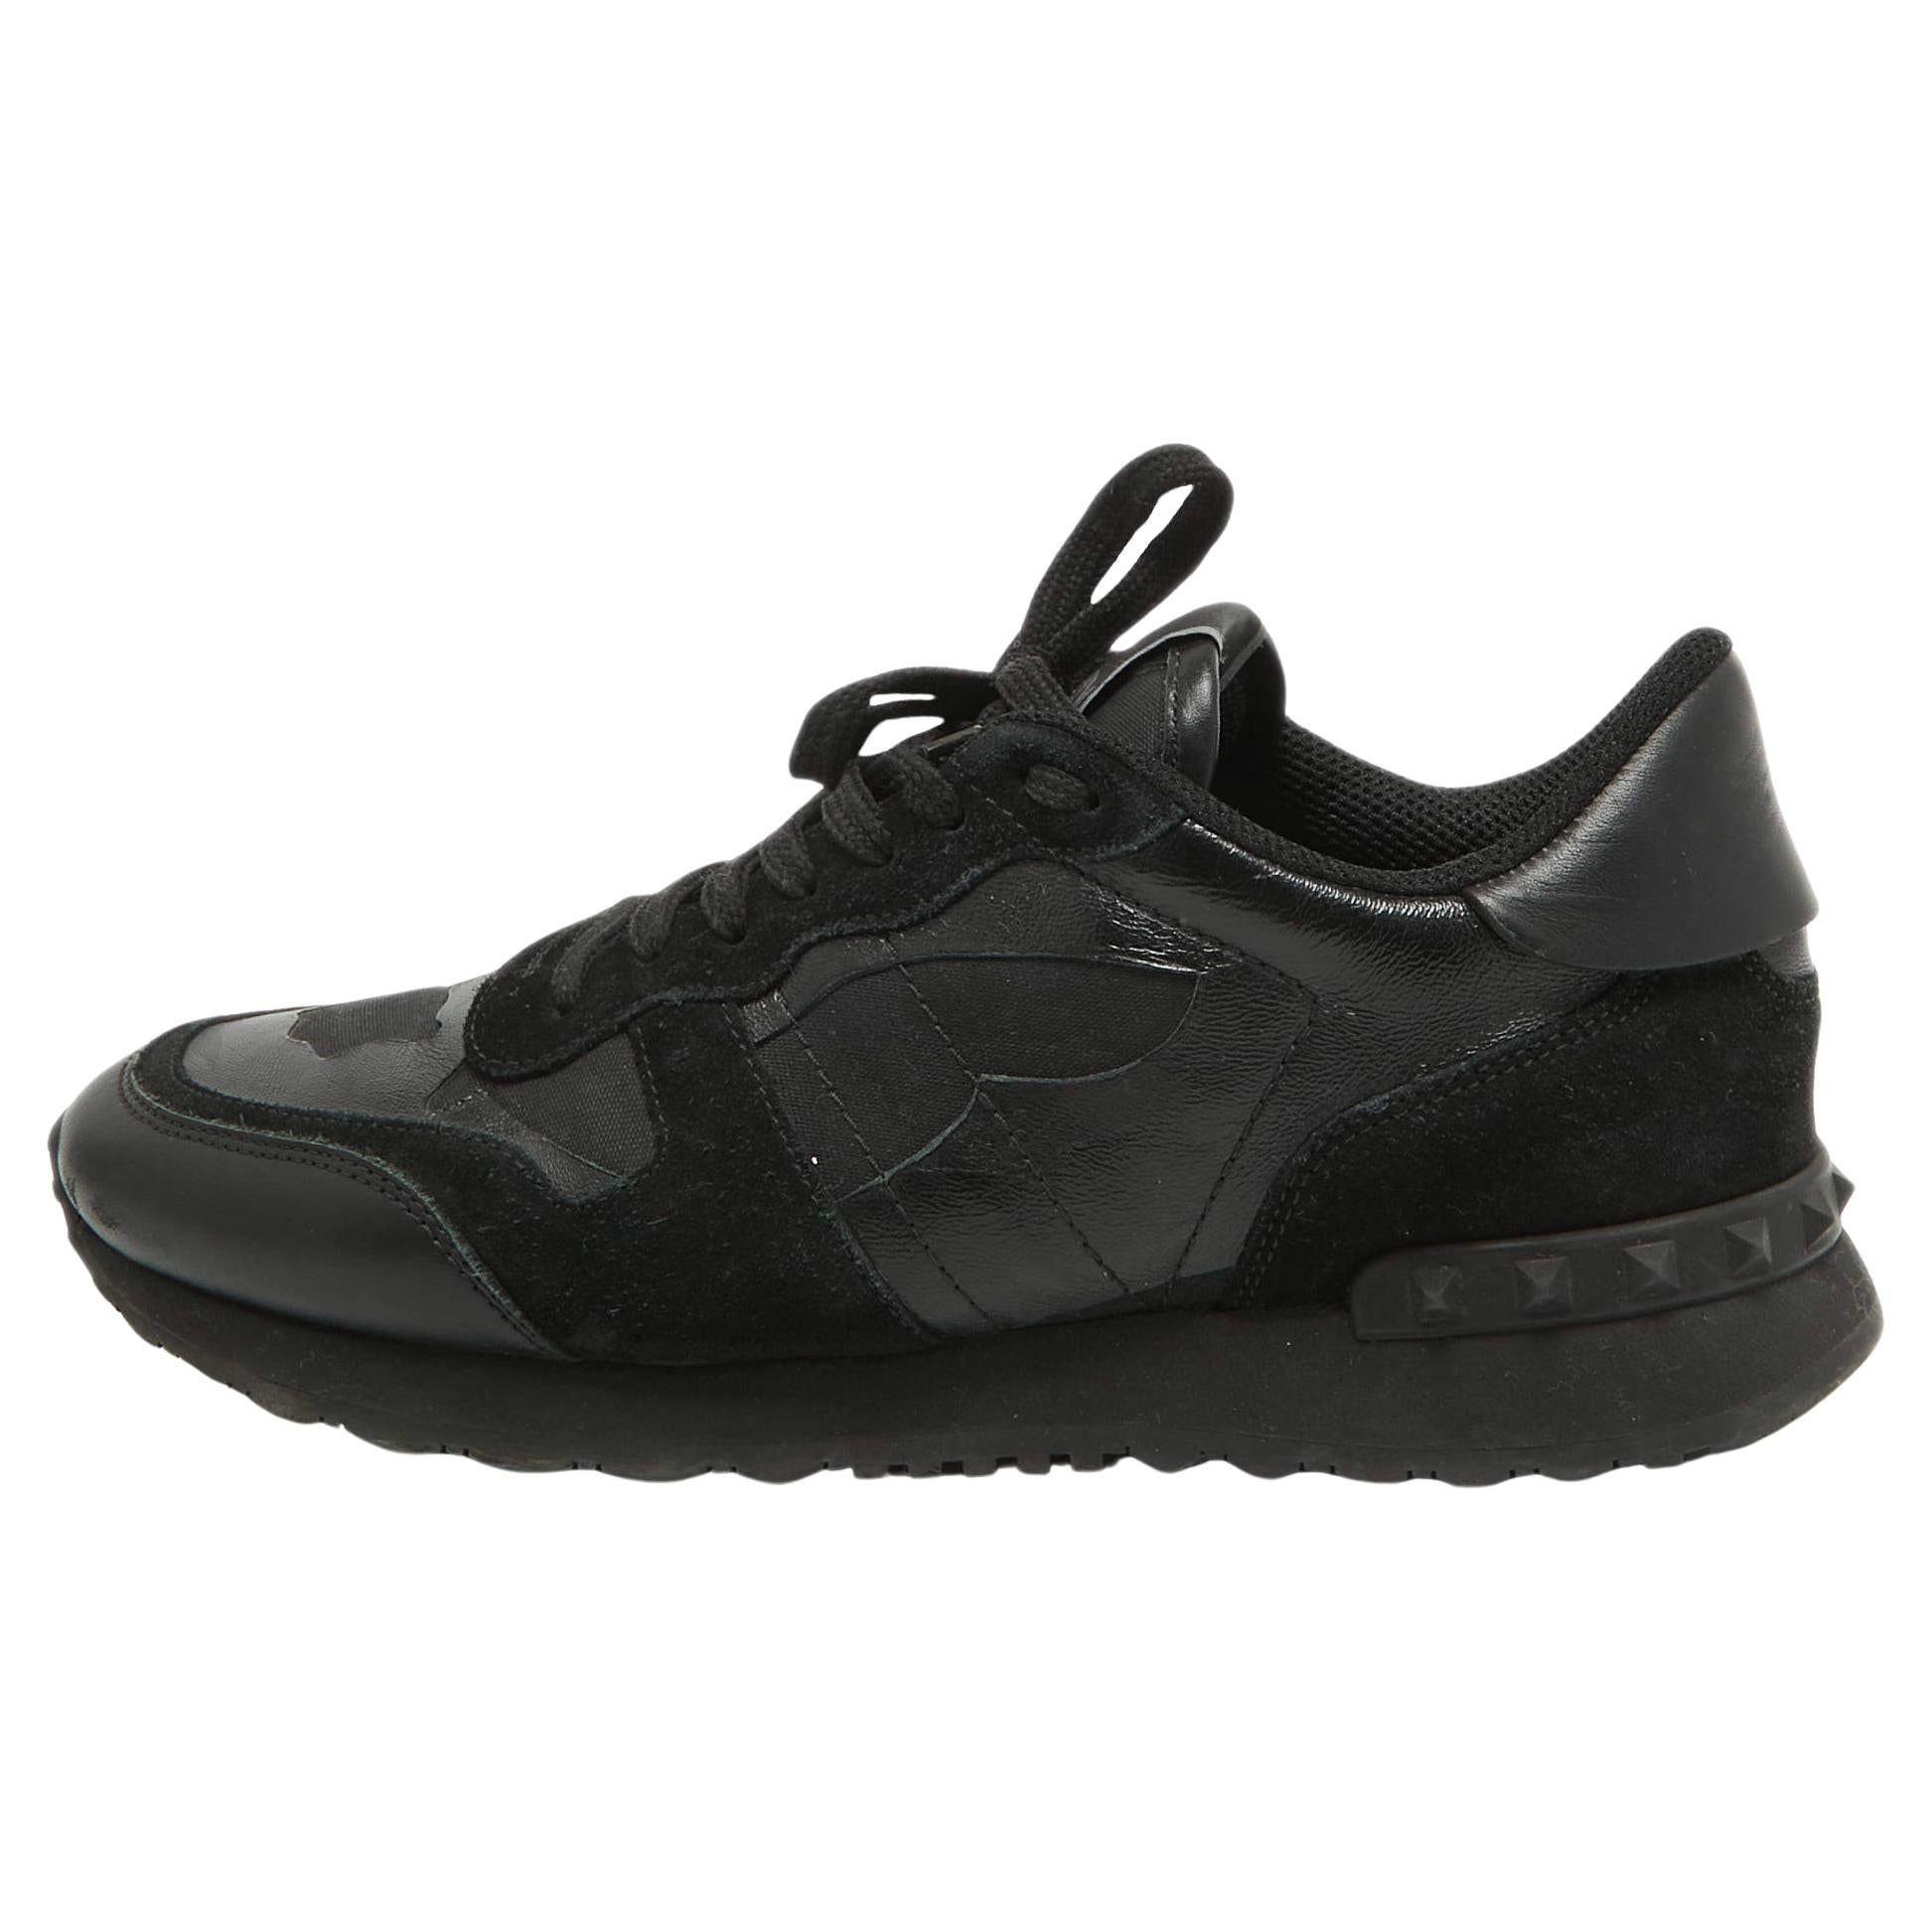 Valentino Black Leather and Suede Rockrunner Law Top Sneakers Size 40 For Sale